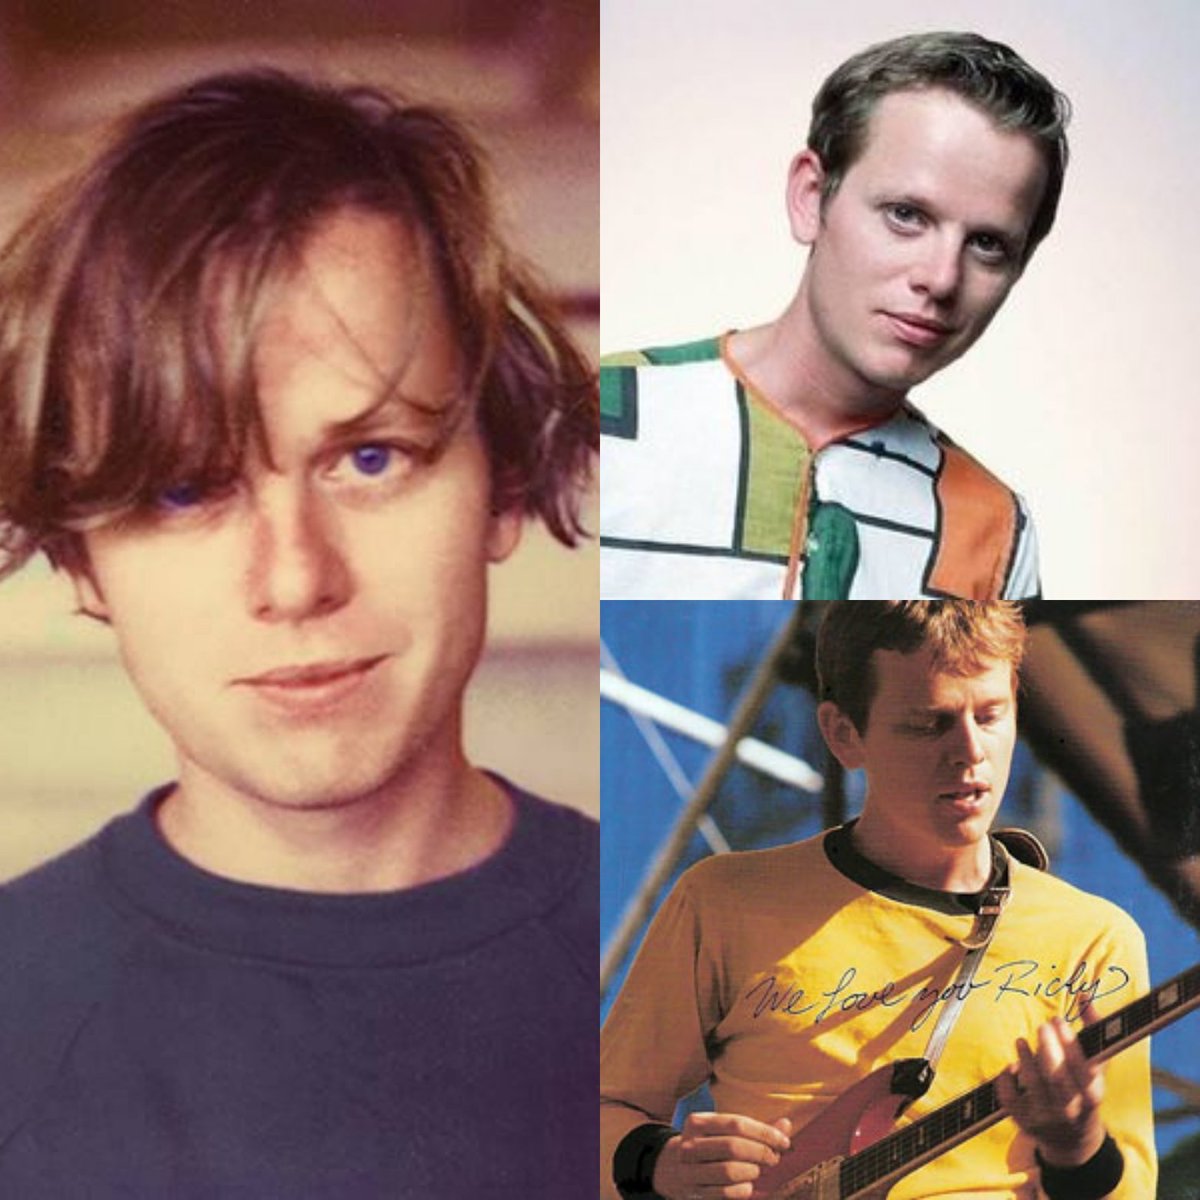 Remembering
the late great 
#RickyWilson 
who passed away 
on this date in 1985
What are your @TheB52s 
memories and fav tracks?